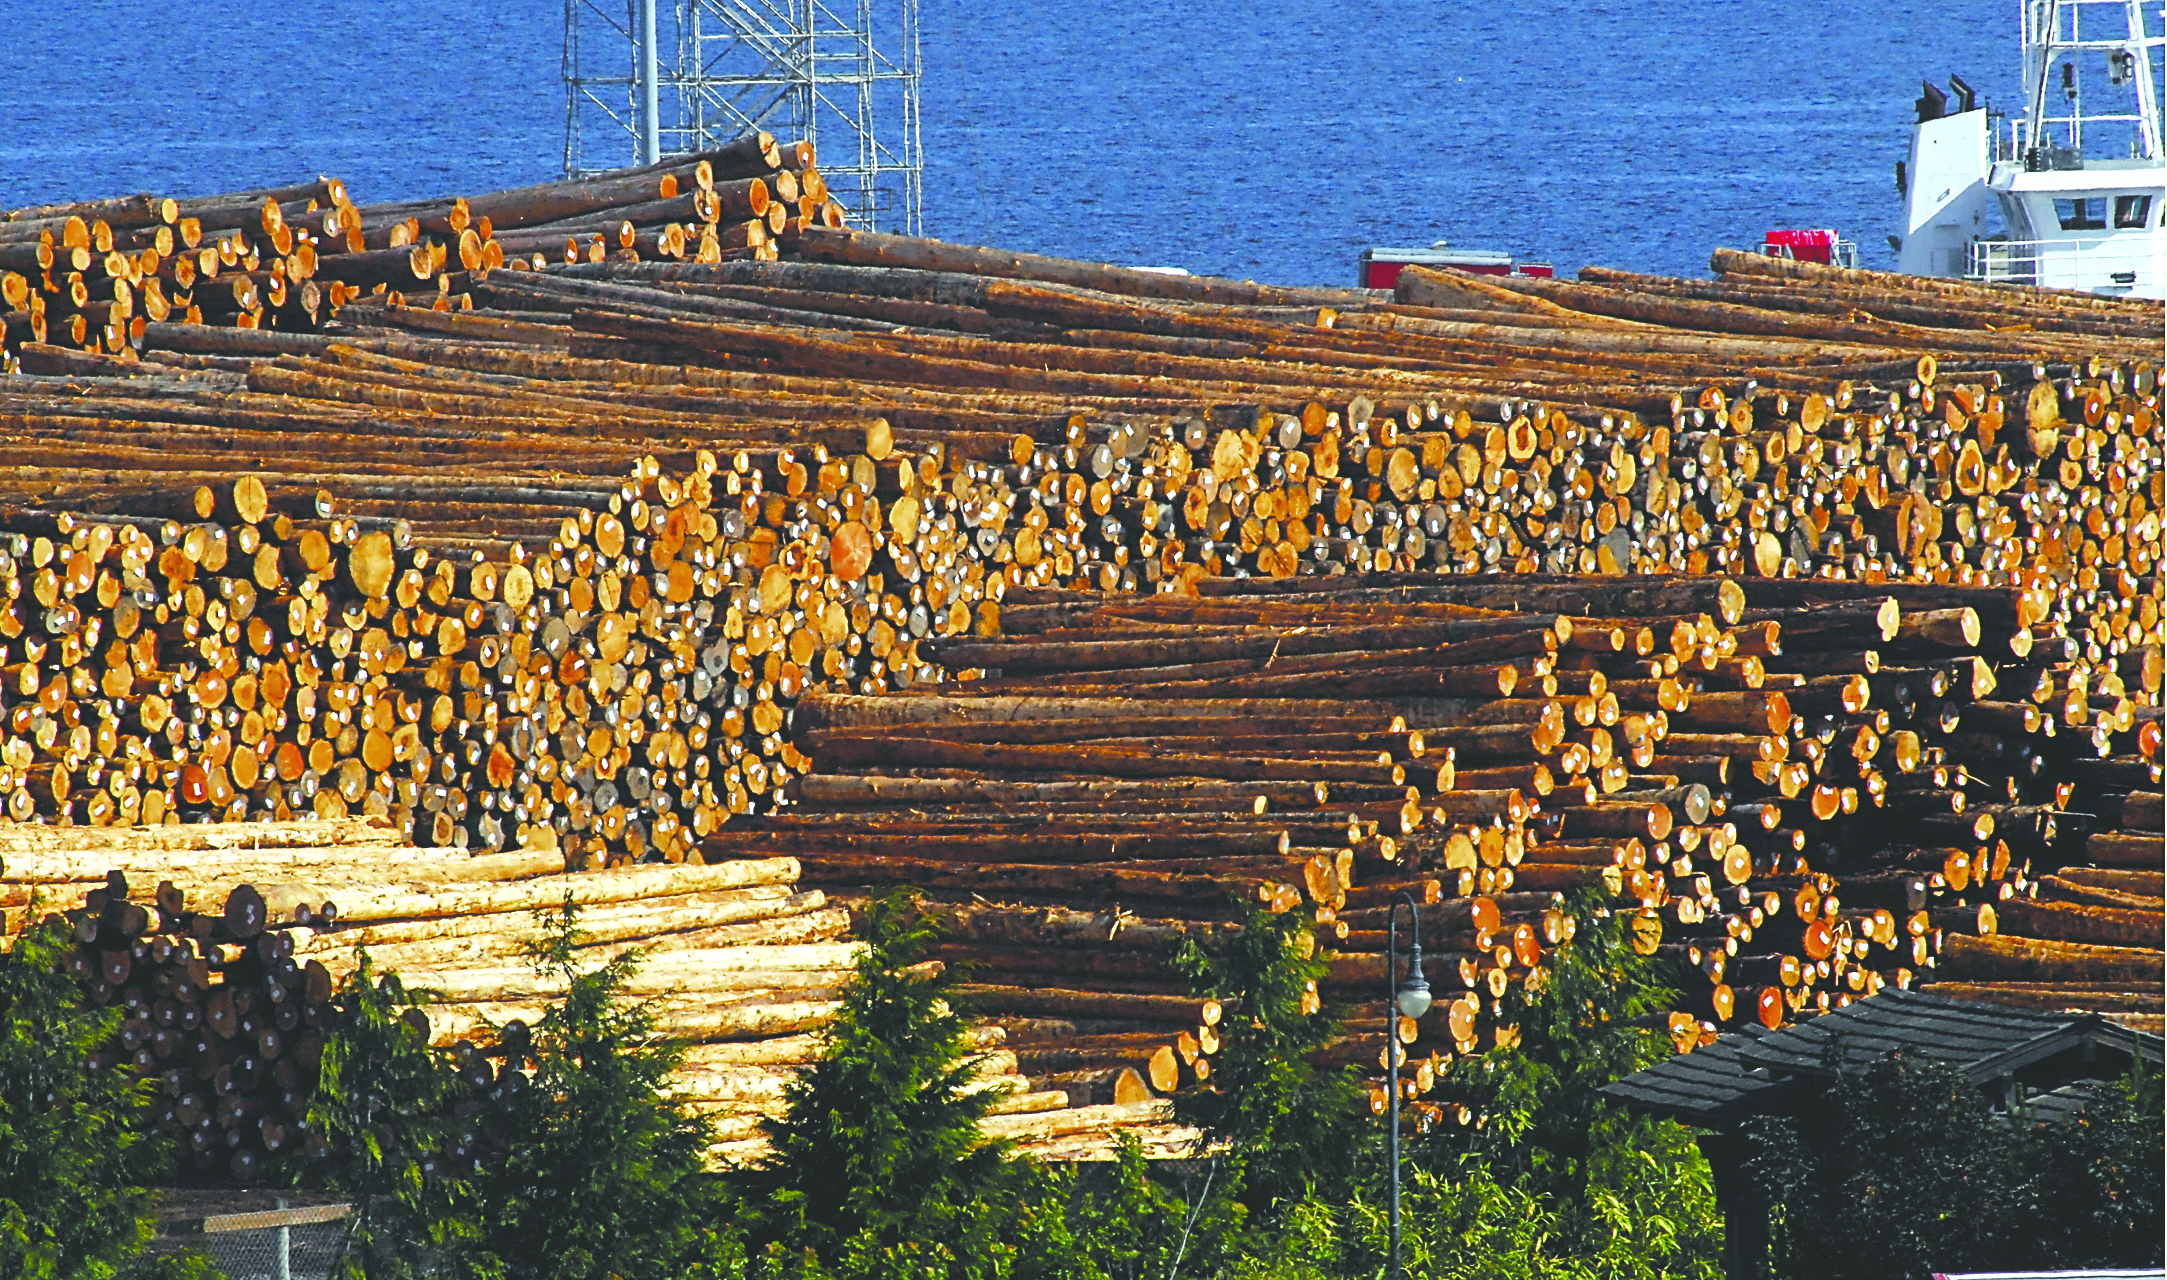 Debarked logs for export are piled high in a Port of Port Angeles log yard on Port Angeles Harbor. Keith Thorpe/Peninsula Daily News